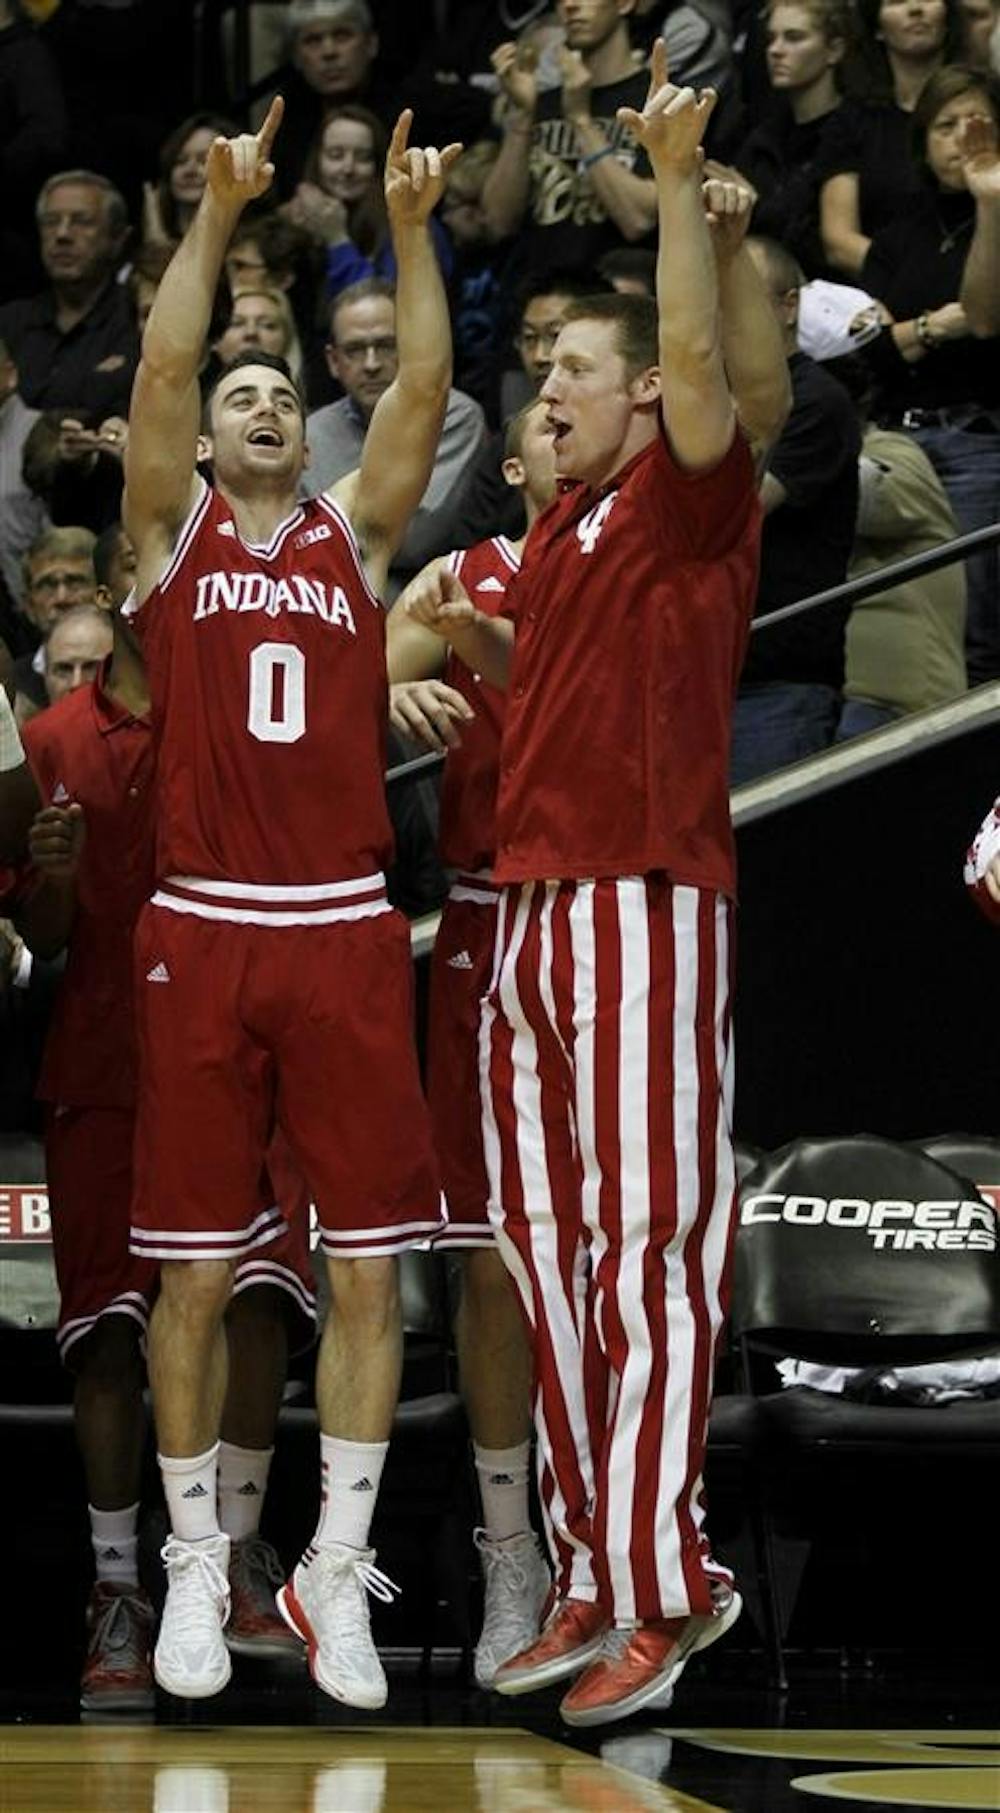 ThenjJunior forwards Jeff Howard and Will Sheehey dance before the second half Jan. 30 in the game against Purdue at Mackey Arena. IU won 97-60.